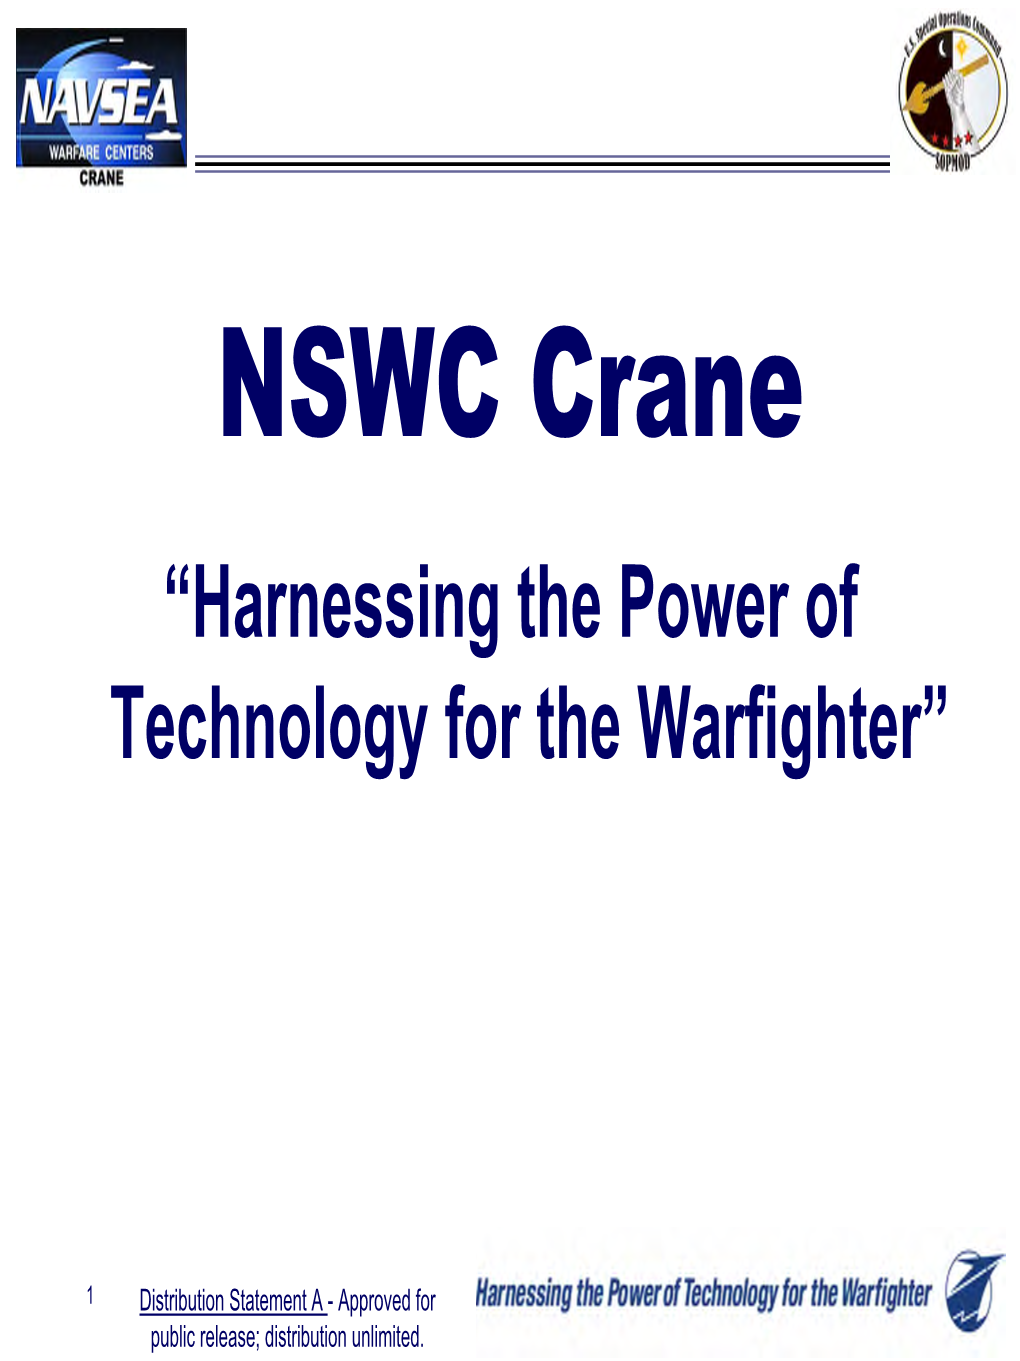 NSWC Crane “Harnessing the Power of Technology for the Warfighter”